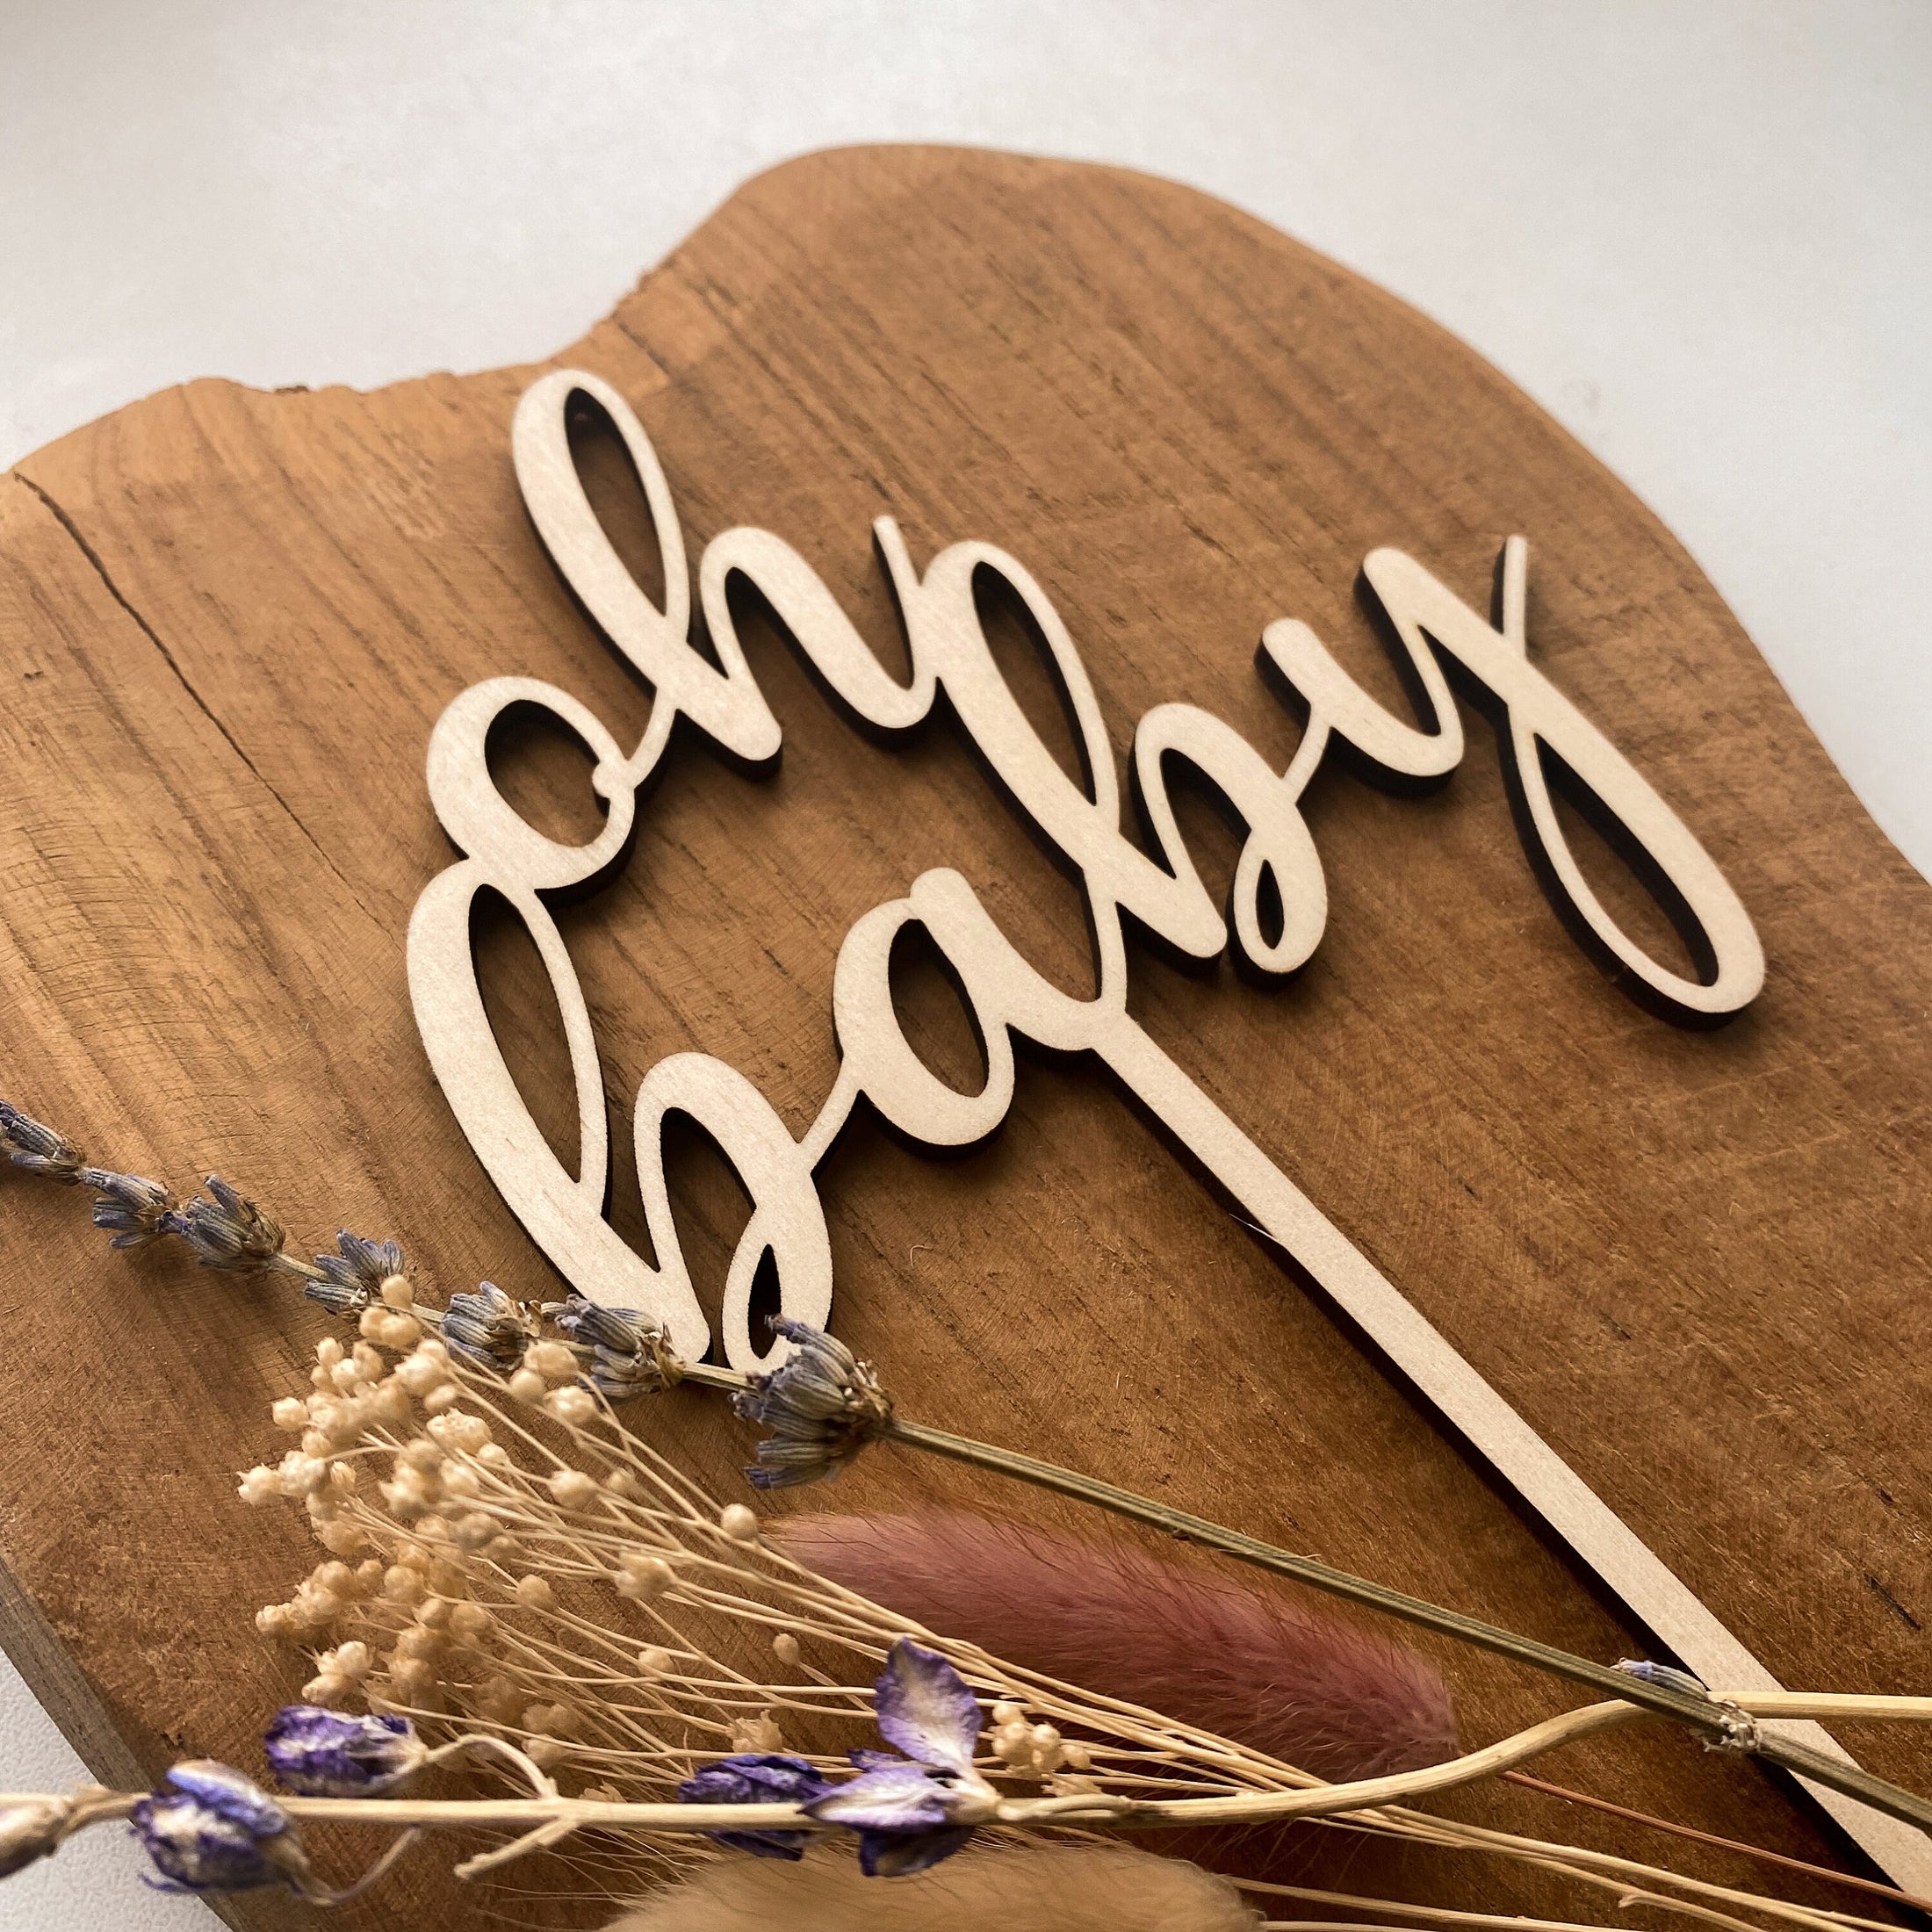 Cake Topper "oh baby"